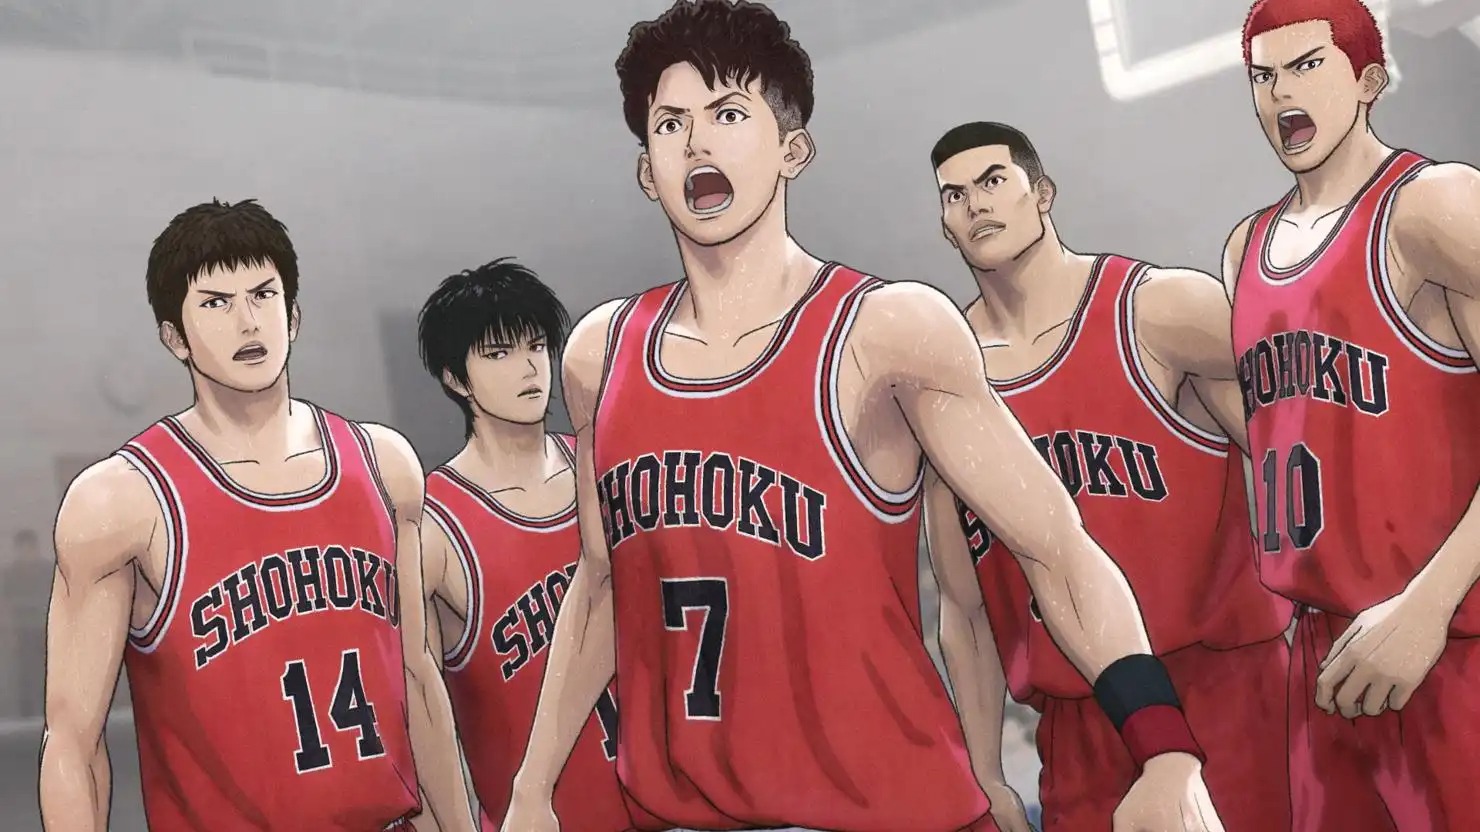 Crunchyroll - THE FIRST SLAM DUNK Anime Film Travels Past Your Name to Be  the Top Japanese Movie in South Korea of All Time